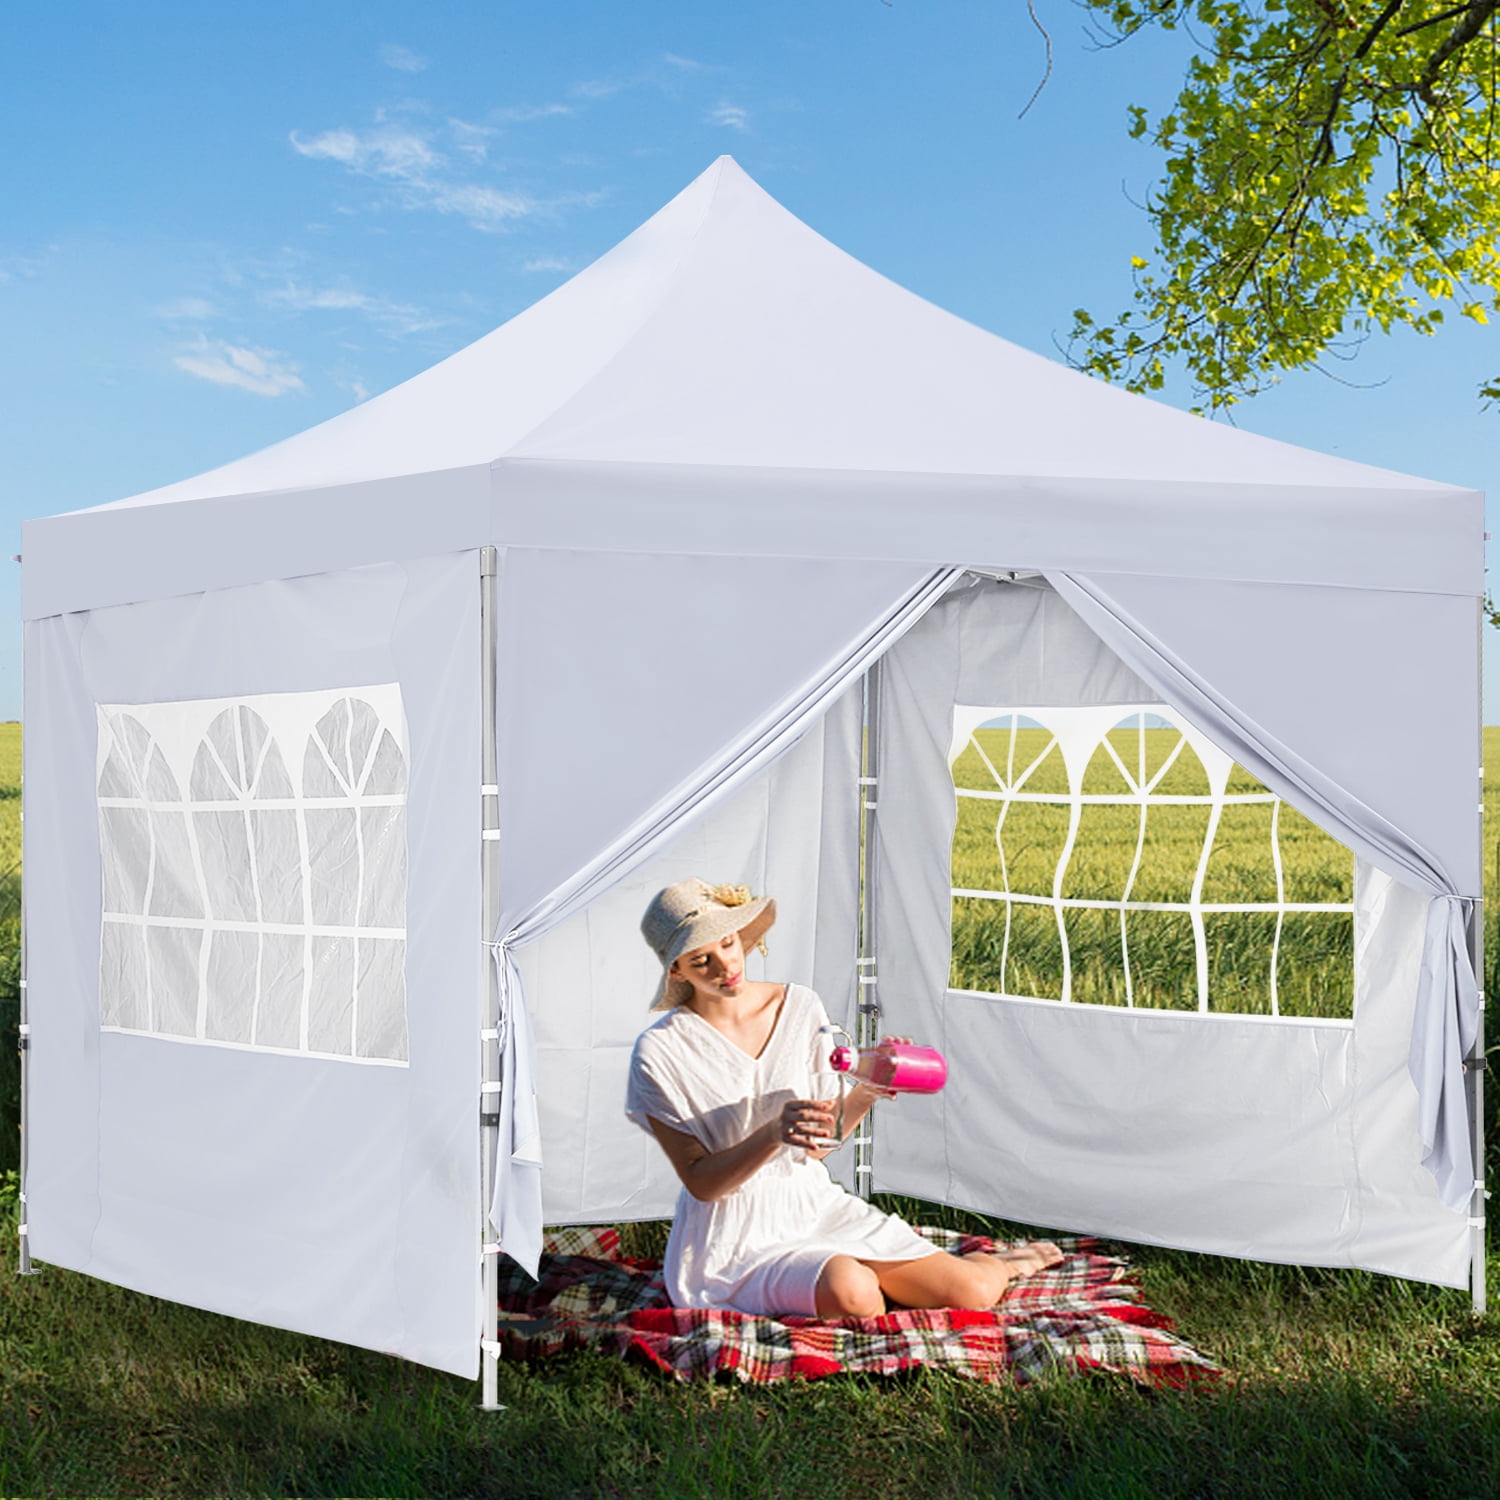 10x10 White Pop Up Instant Canopy Gazebo Party Tent Trade Show  Tent Side Walls 